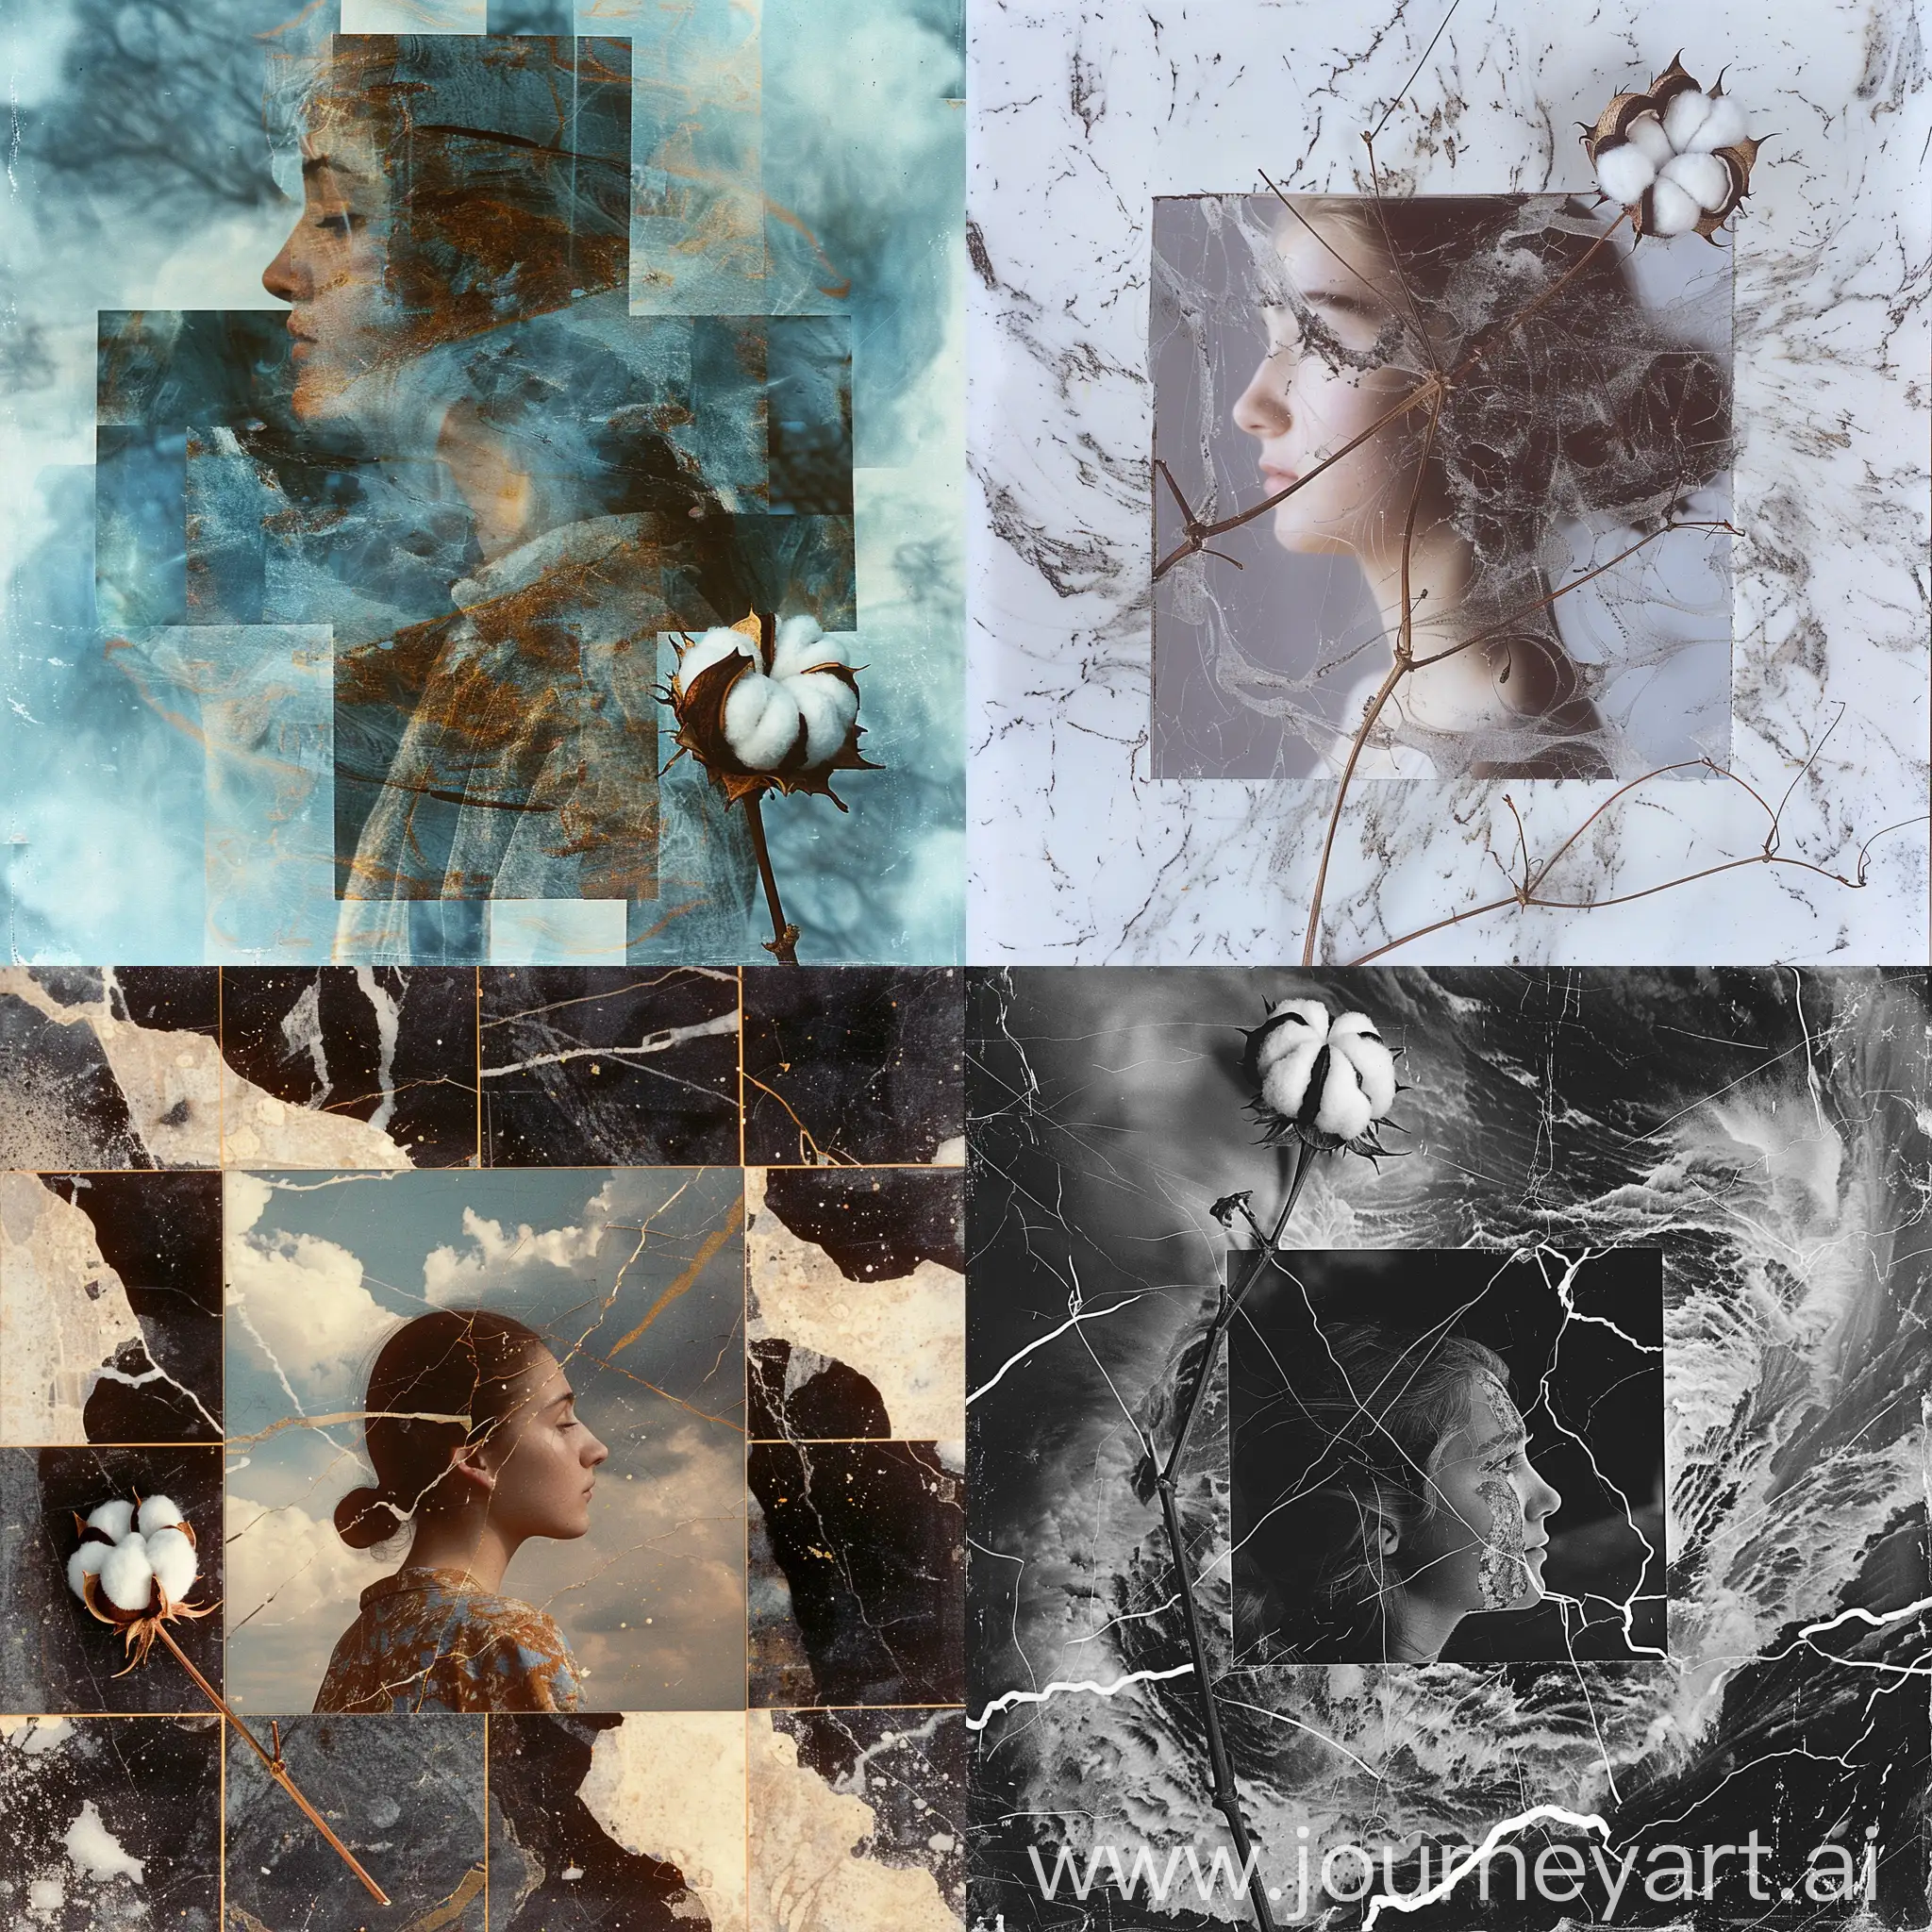 Portrait-of-a-Girl-in-a-Square-Triple-Exposure-with-Marble-Patterns-and-Cotton-Dry-Flowers